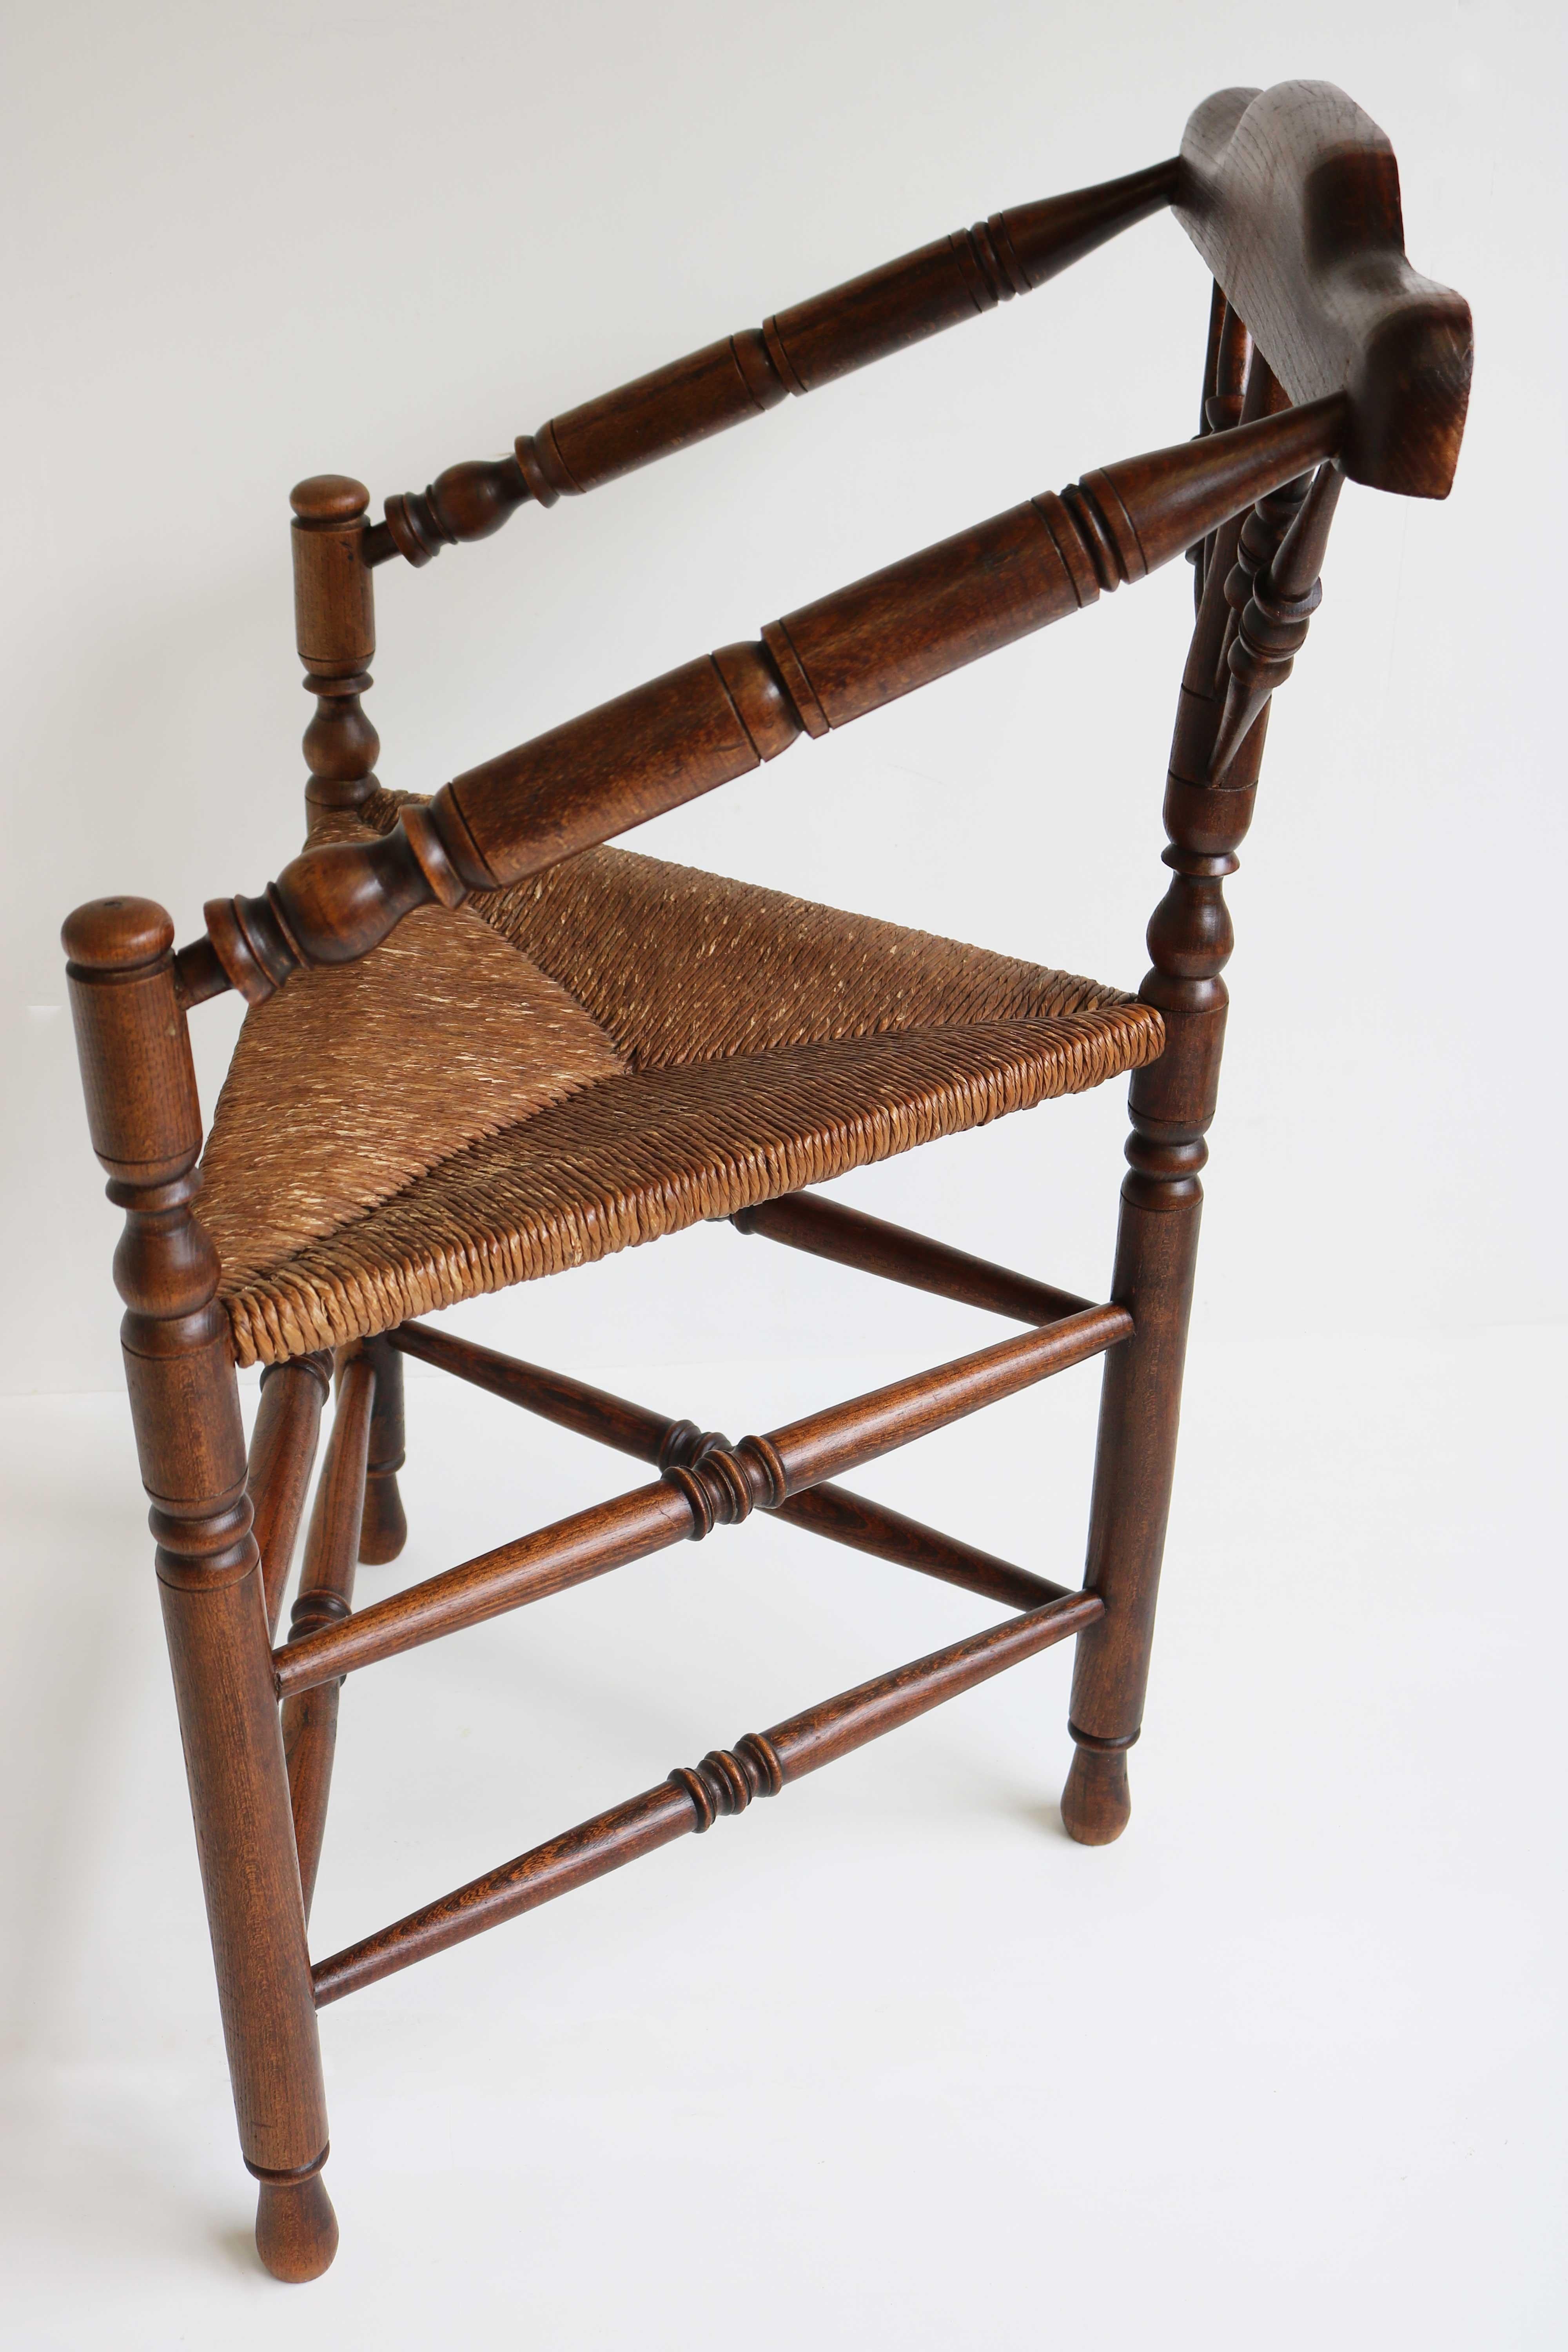 Antique Edwardian Style Triangular Corner Chair Rush Seat Knitting Armchair 1900 For Sale 3